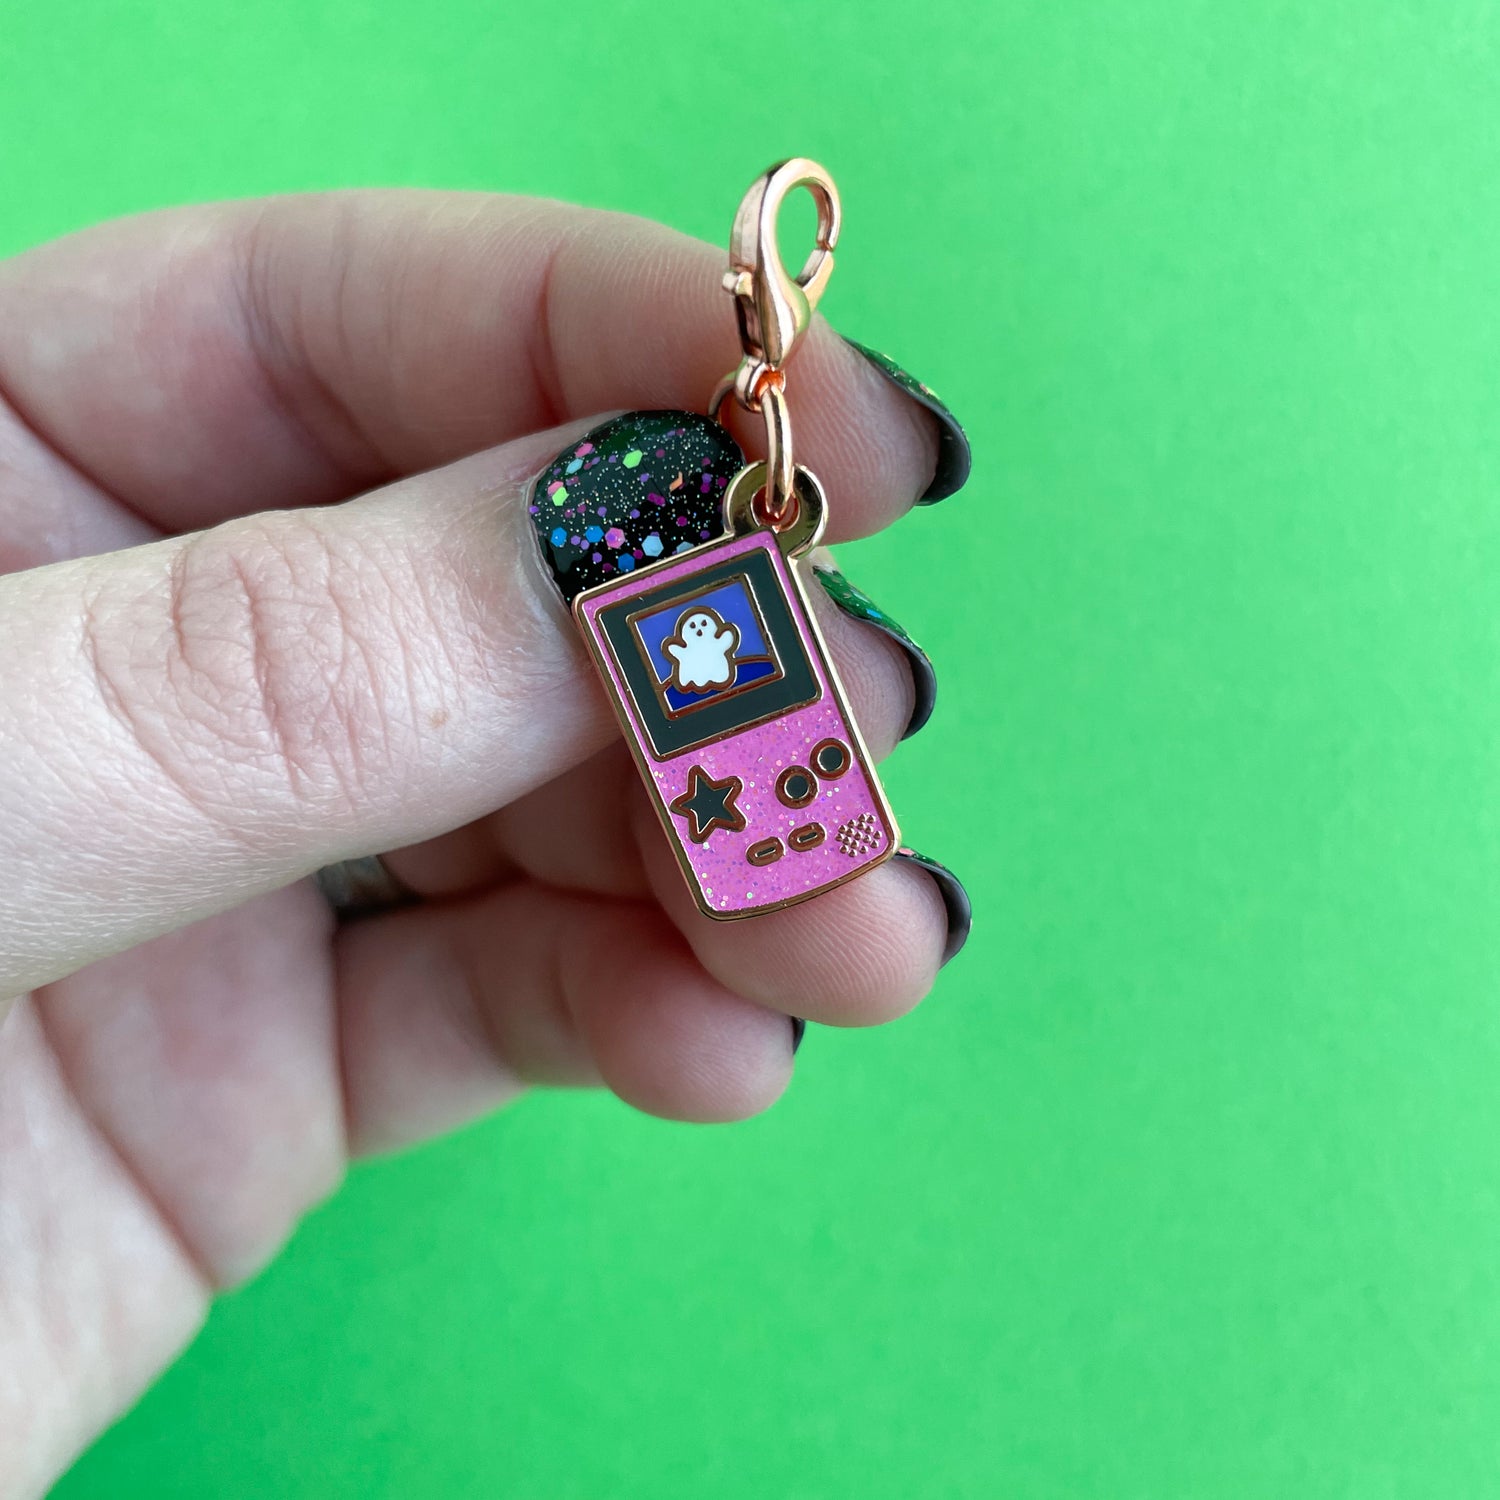 A hand with black and confetti nails holding a lobster claw clasp charm that is the shape of a pink glitter Game Boy with a star button and a cute ghost on the screen. This is on a green paper background.